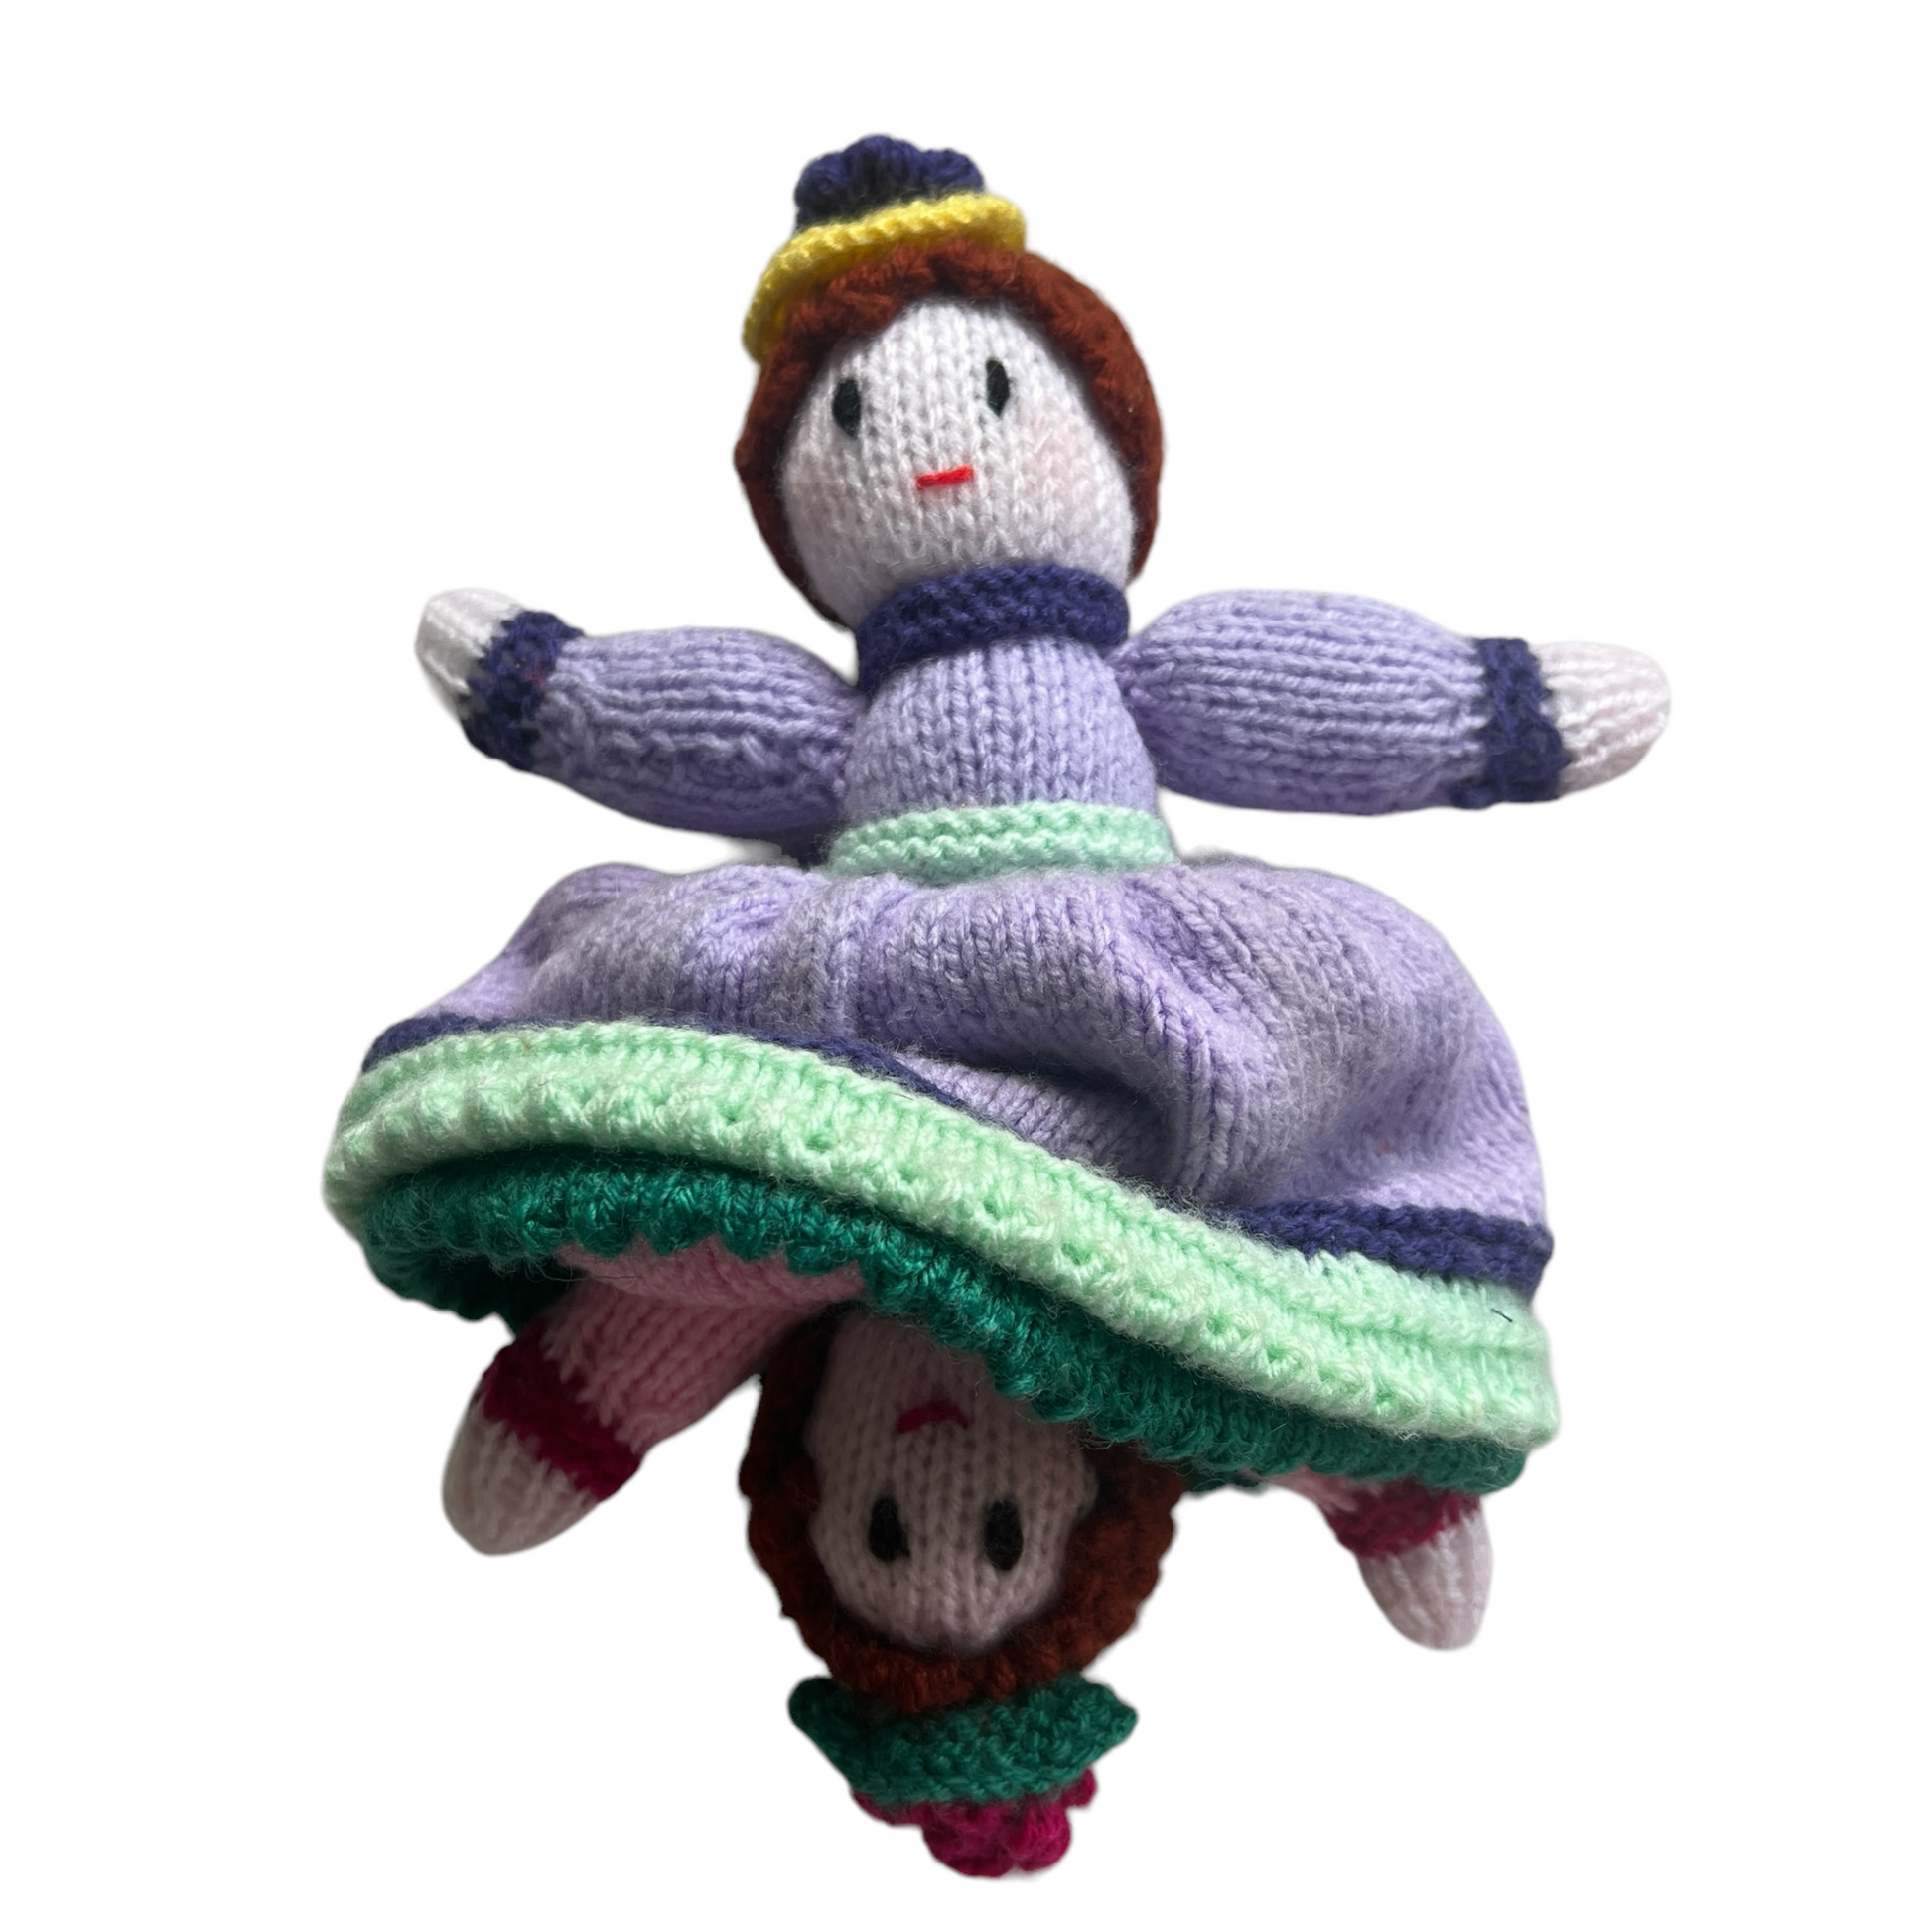 Knitted Double Sided Doll  Splash Quilting   